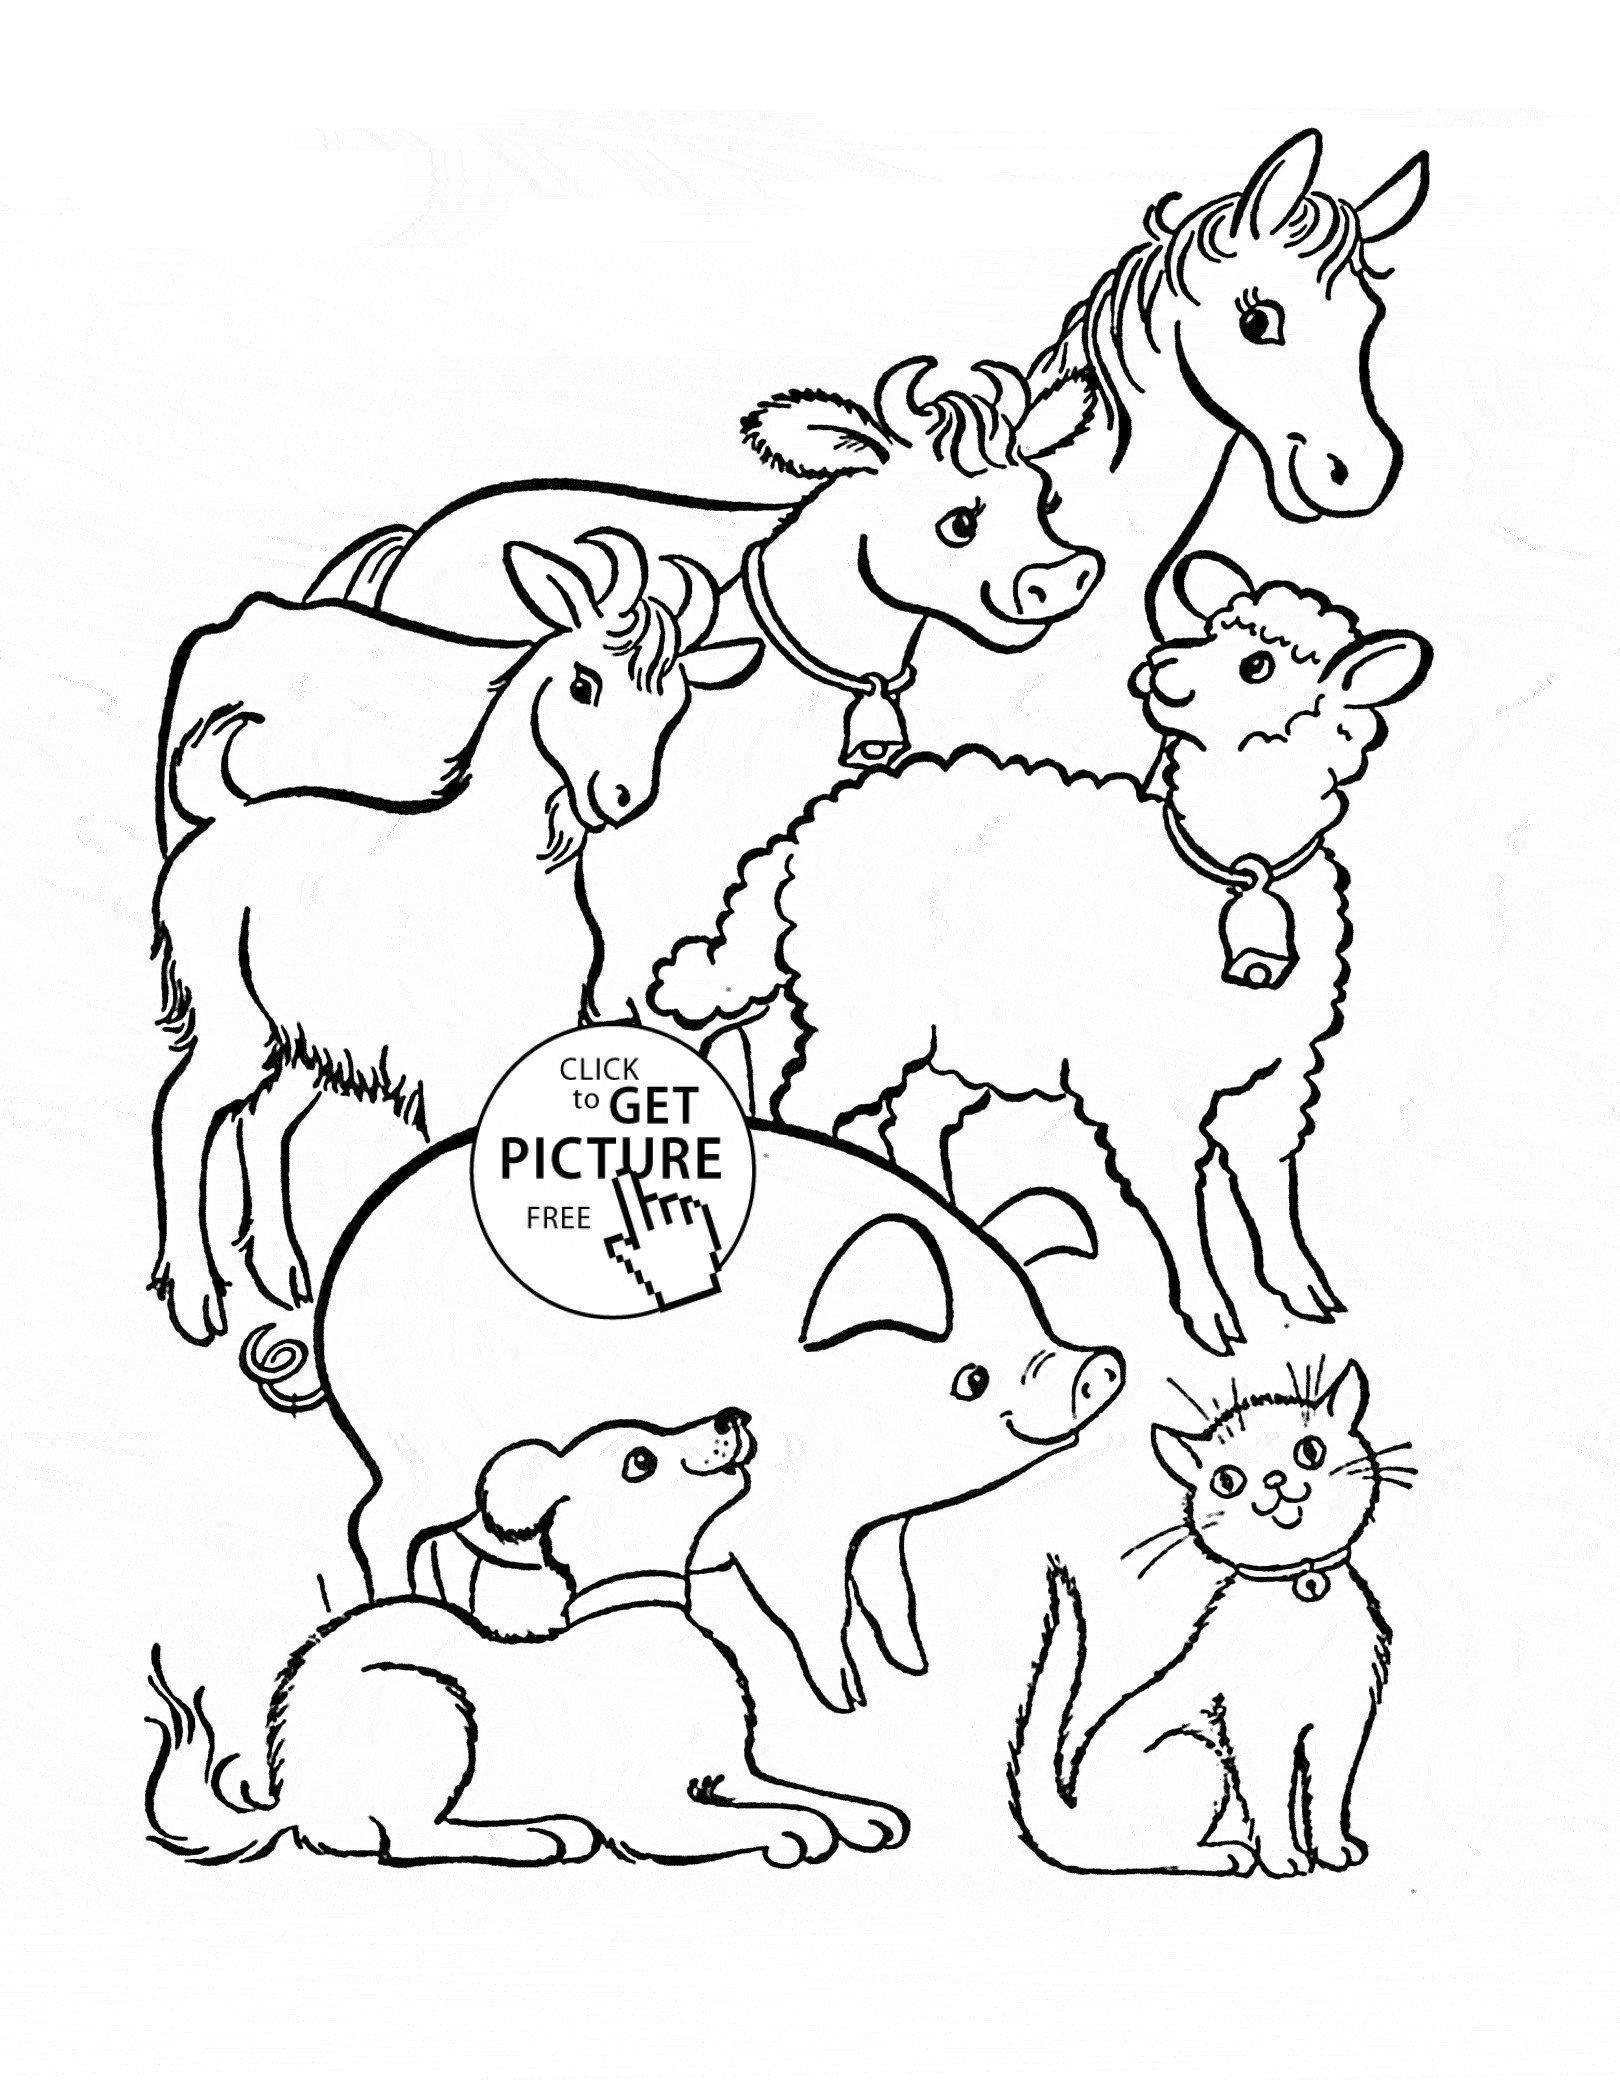 Farm Animal Coloring Pages for Preschoolers - BubaKids.com